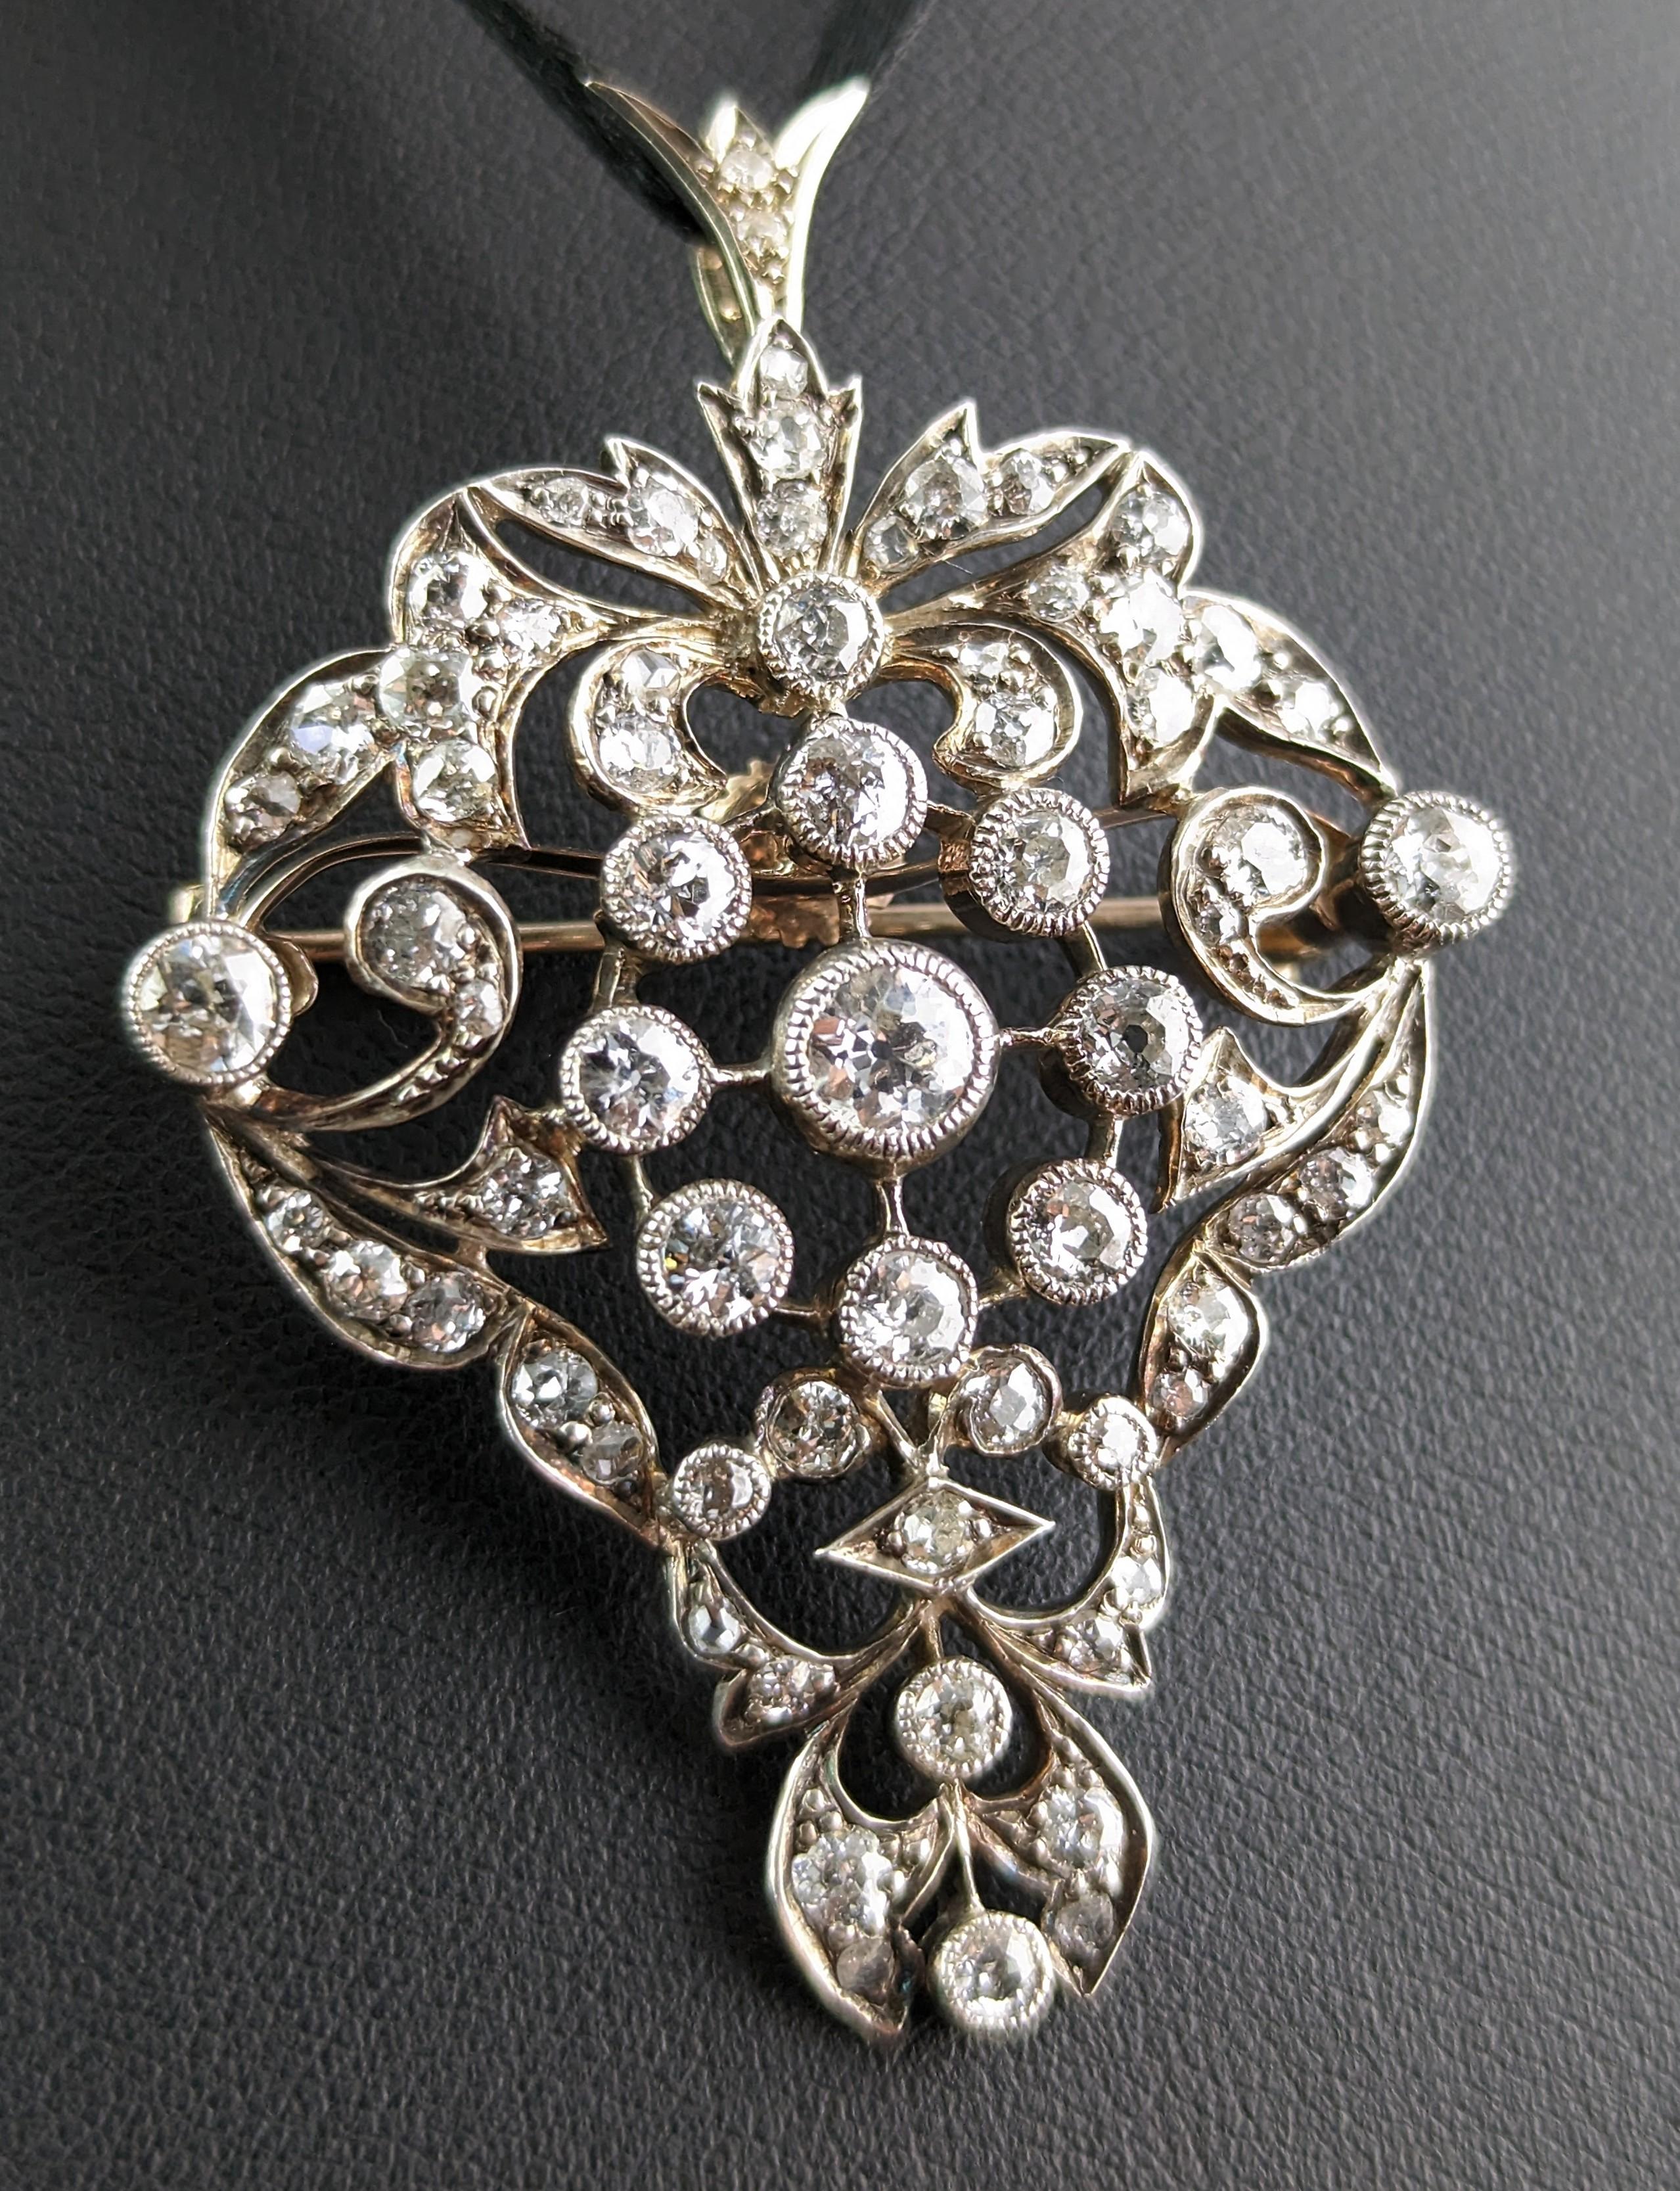 This stunning Victorian diamond pendant is truly a showstopper!

This beautifully crafted piece is both elegant and statement at the same time, the pendant has a beautiful openwork design giving it a lovely feminine vibe and is set with over 3.10ct